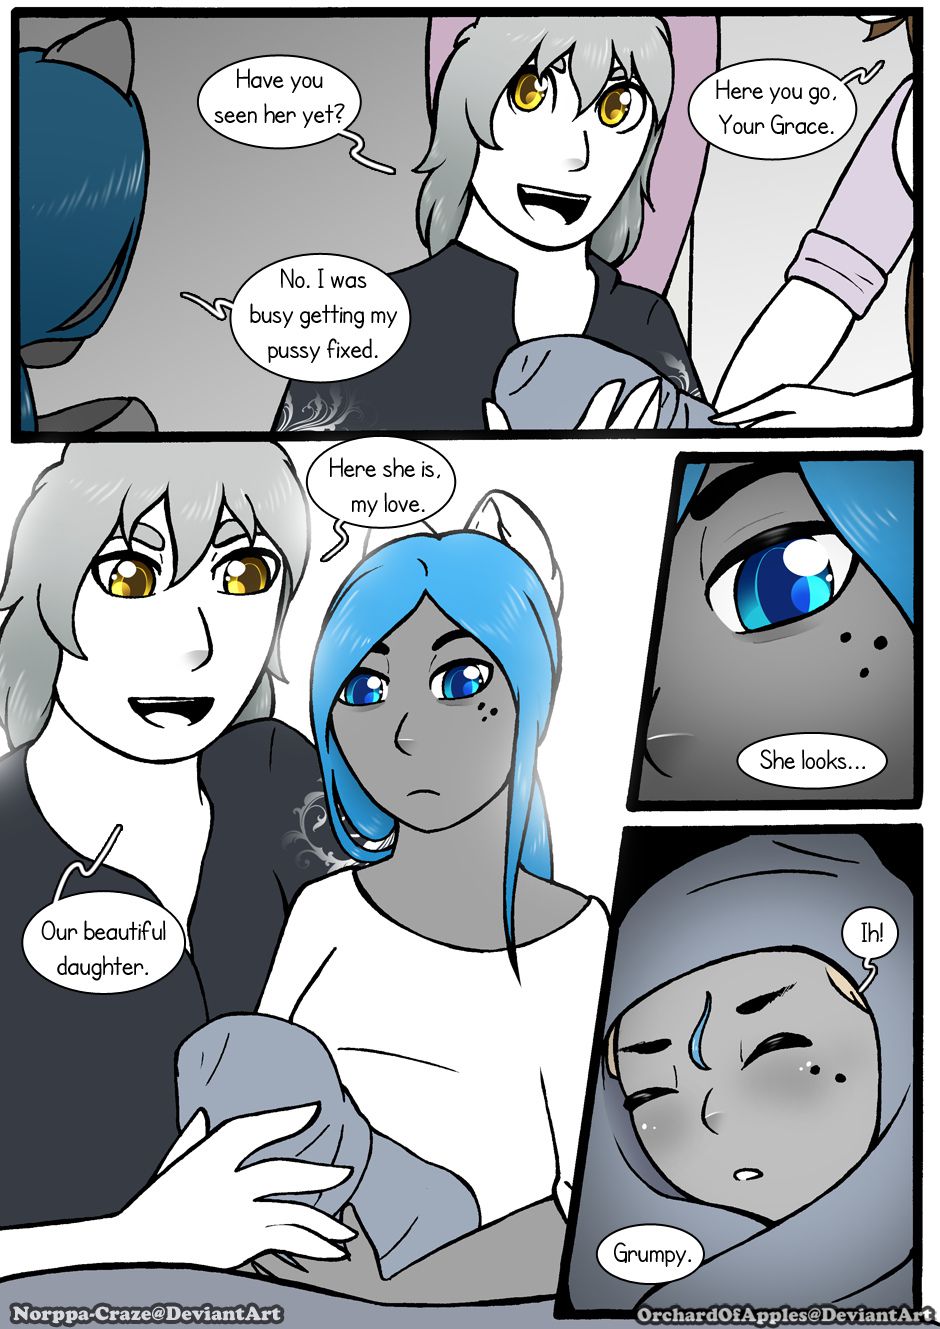 [Jeny-jen94] Between Kings and Queens [Ongoing] 333